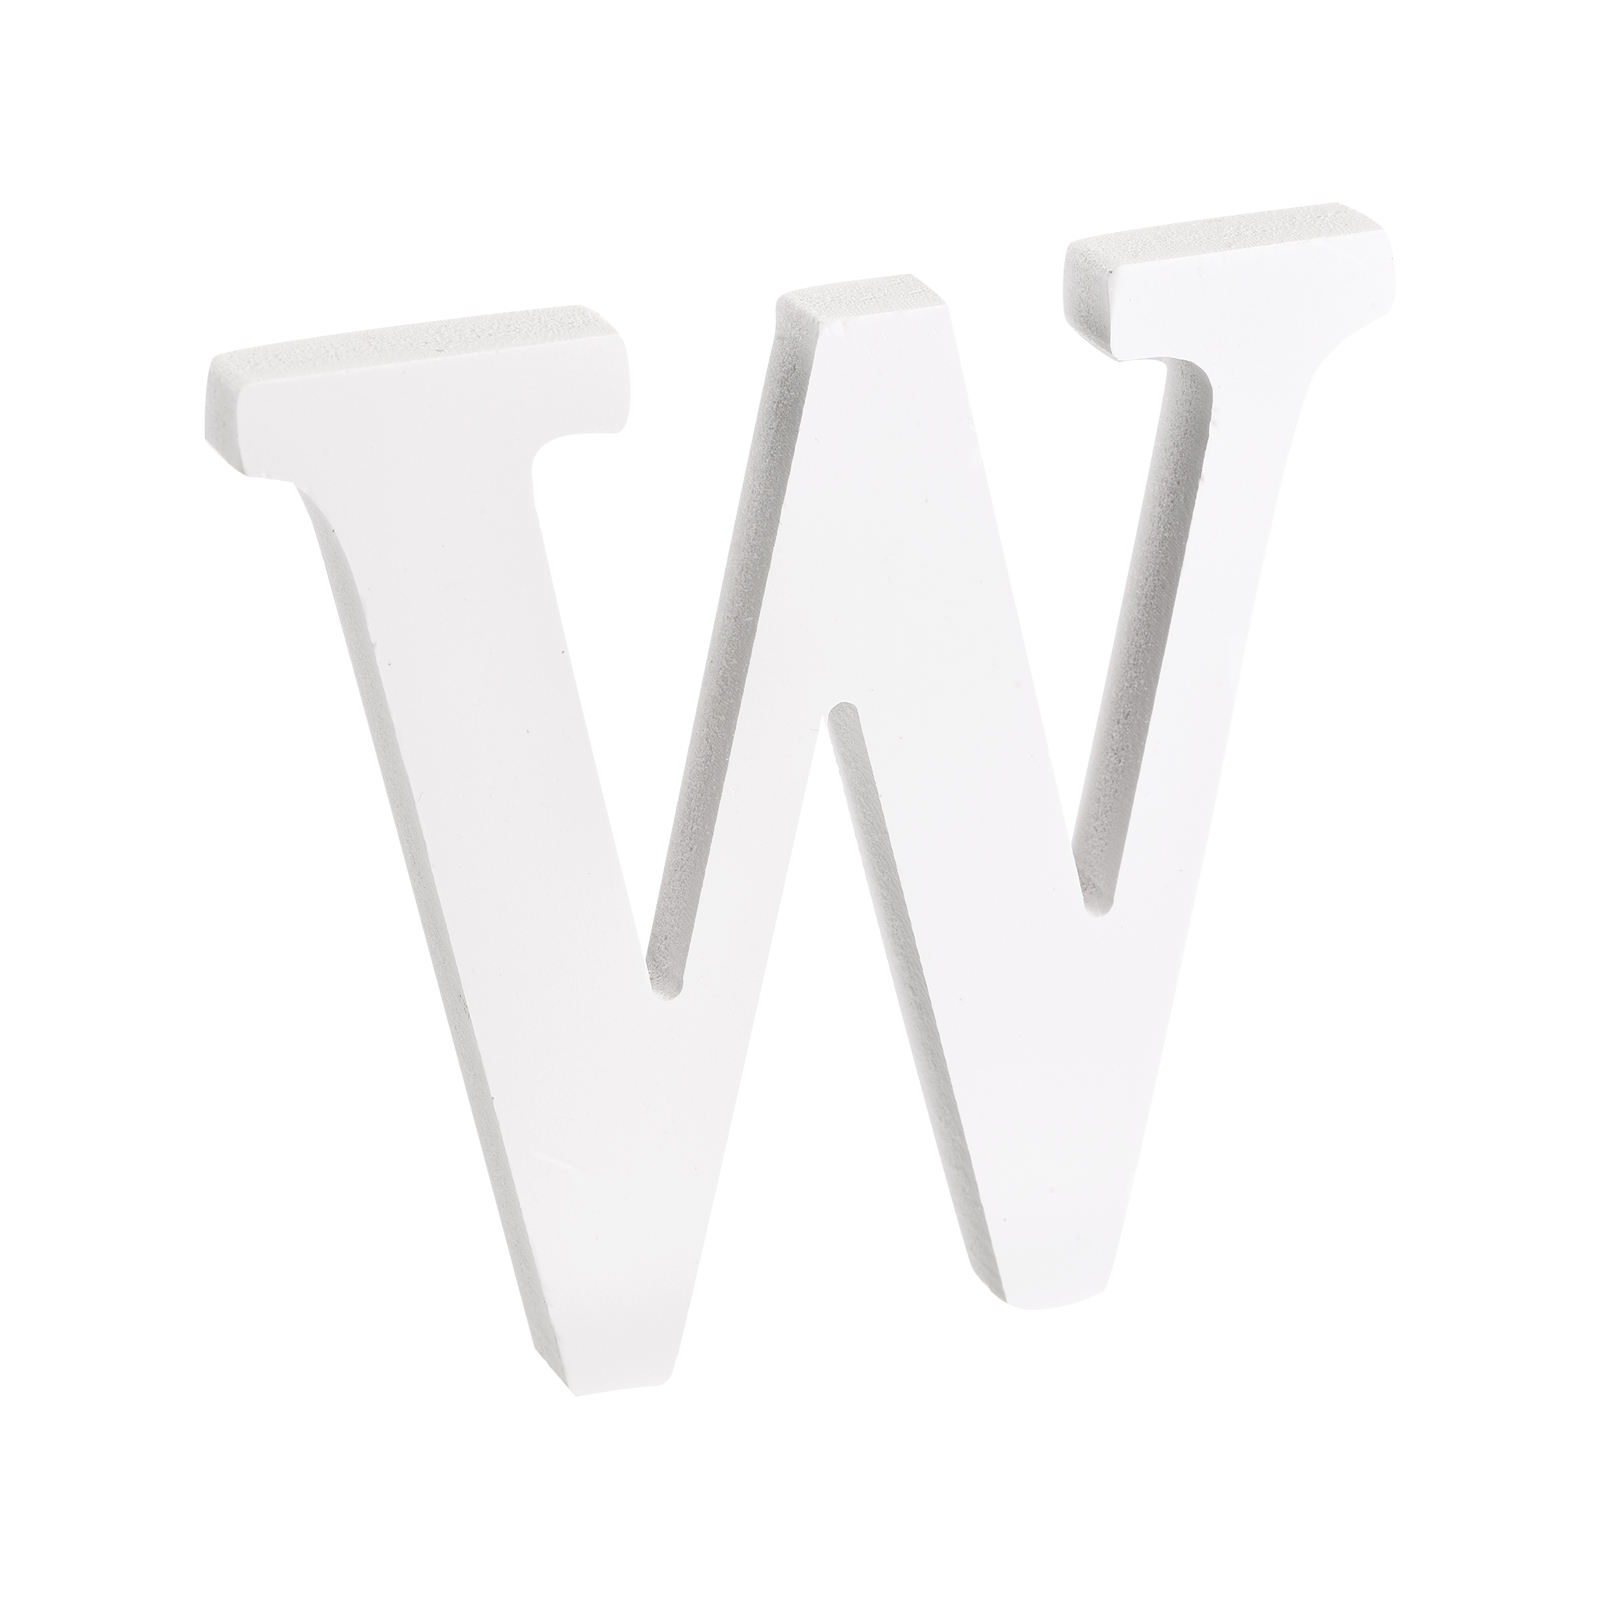 White Wood Letters 6 Inch, Wood Letters for DIY Party Projects (W) 